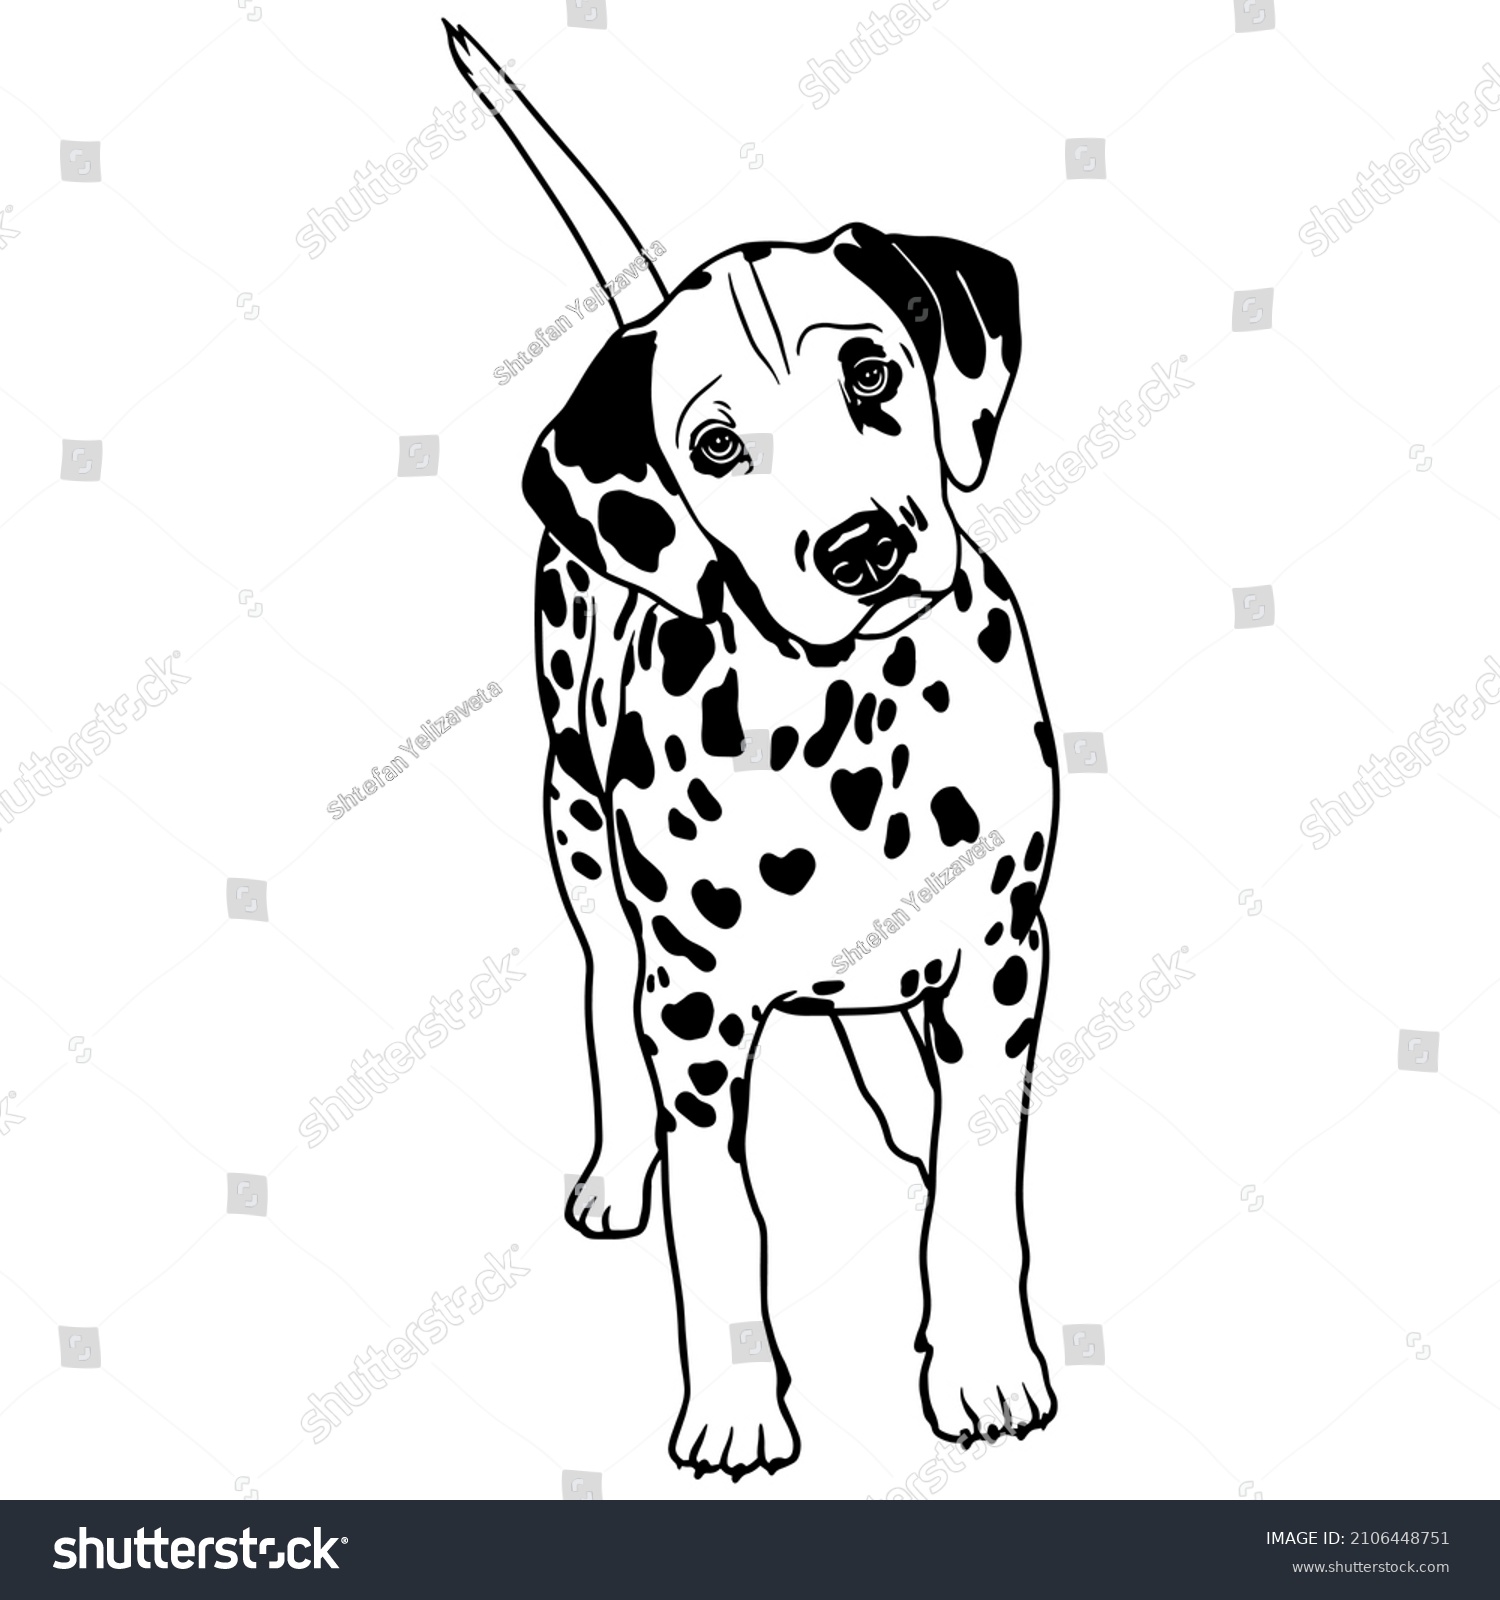 SVG of Dalmatian dog vector illustration.
Looking peeping dog. For cutting vinyl prints and designing T-shirts and mugs. cut stencil file svg